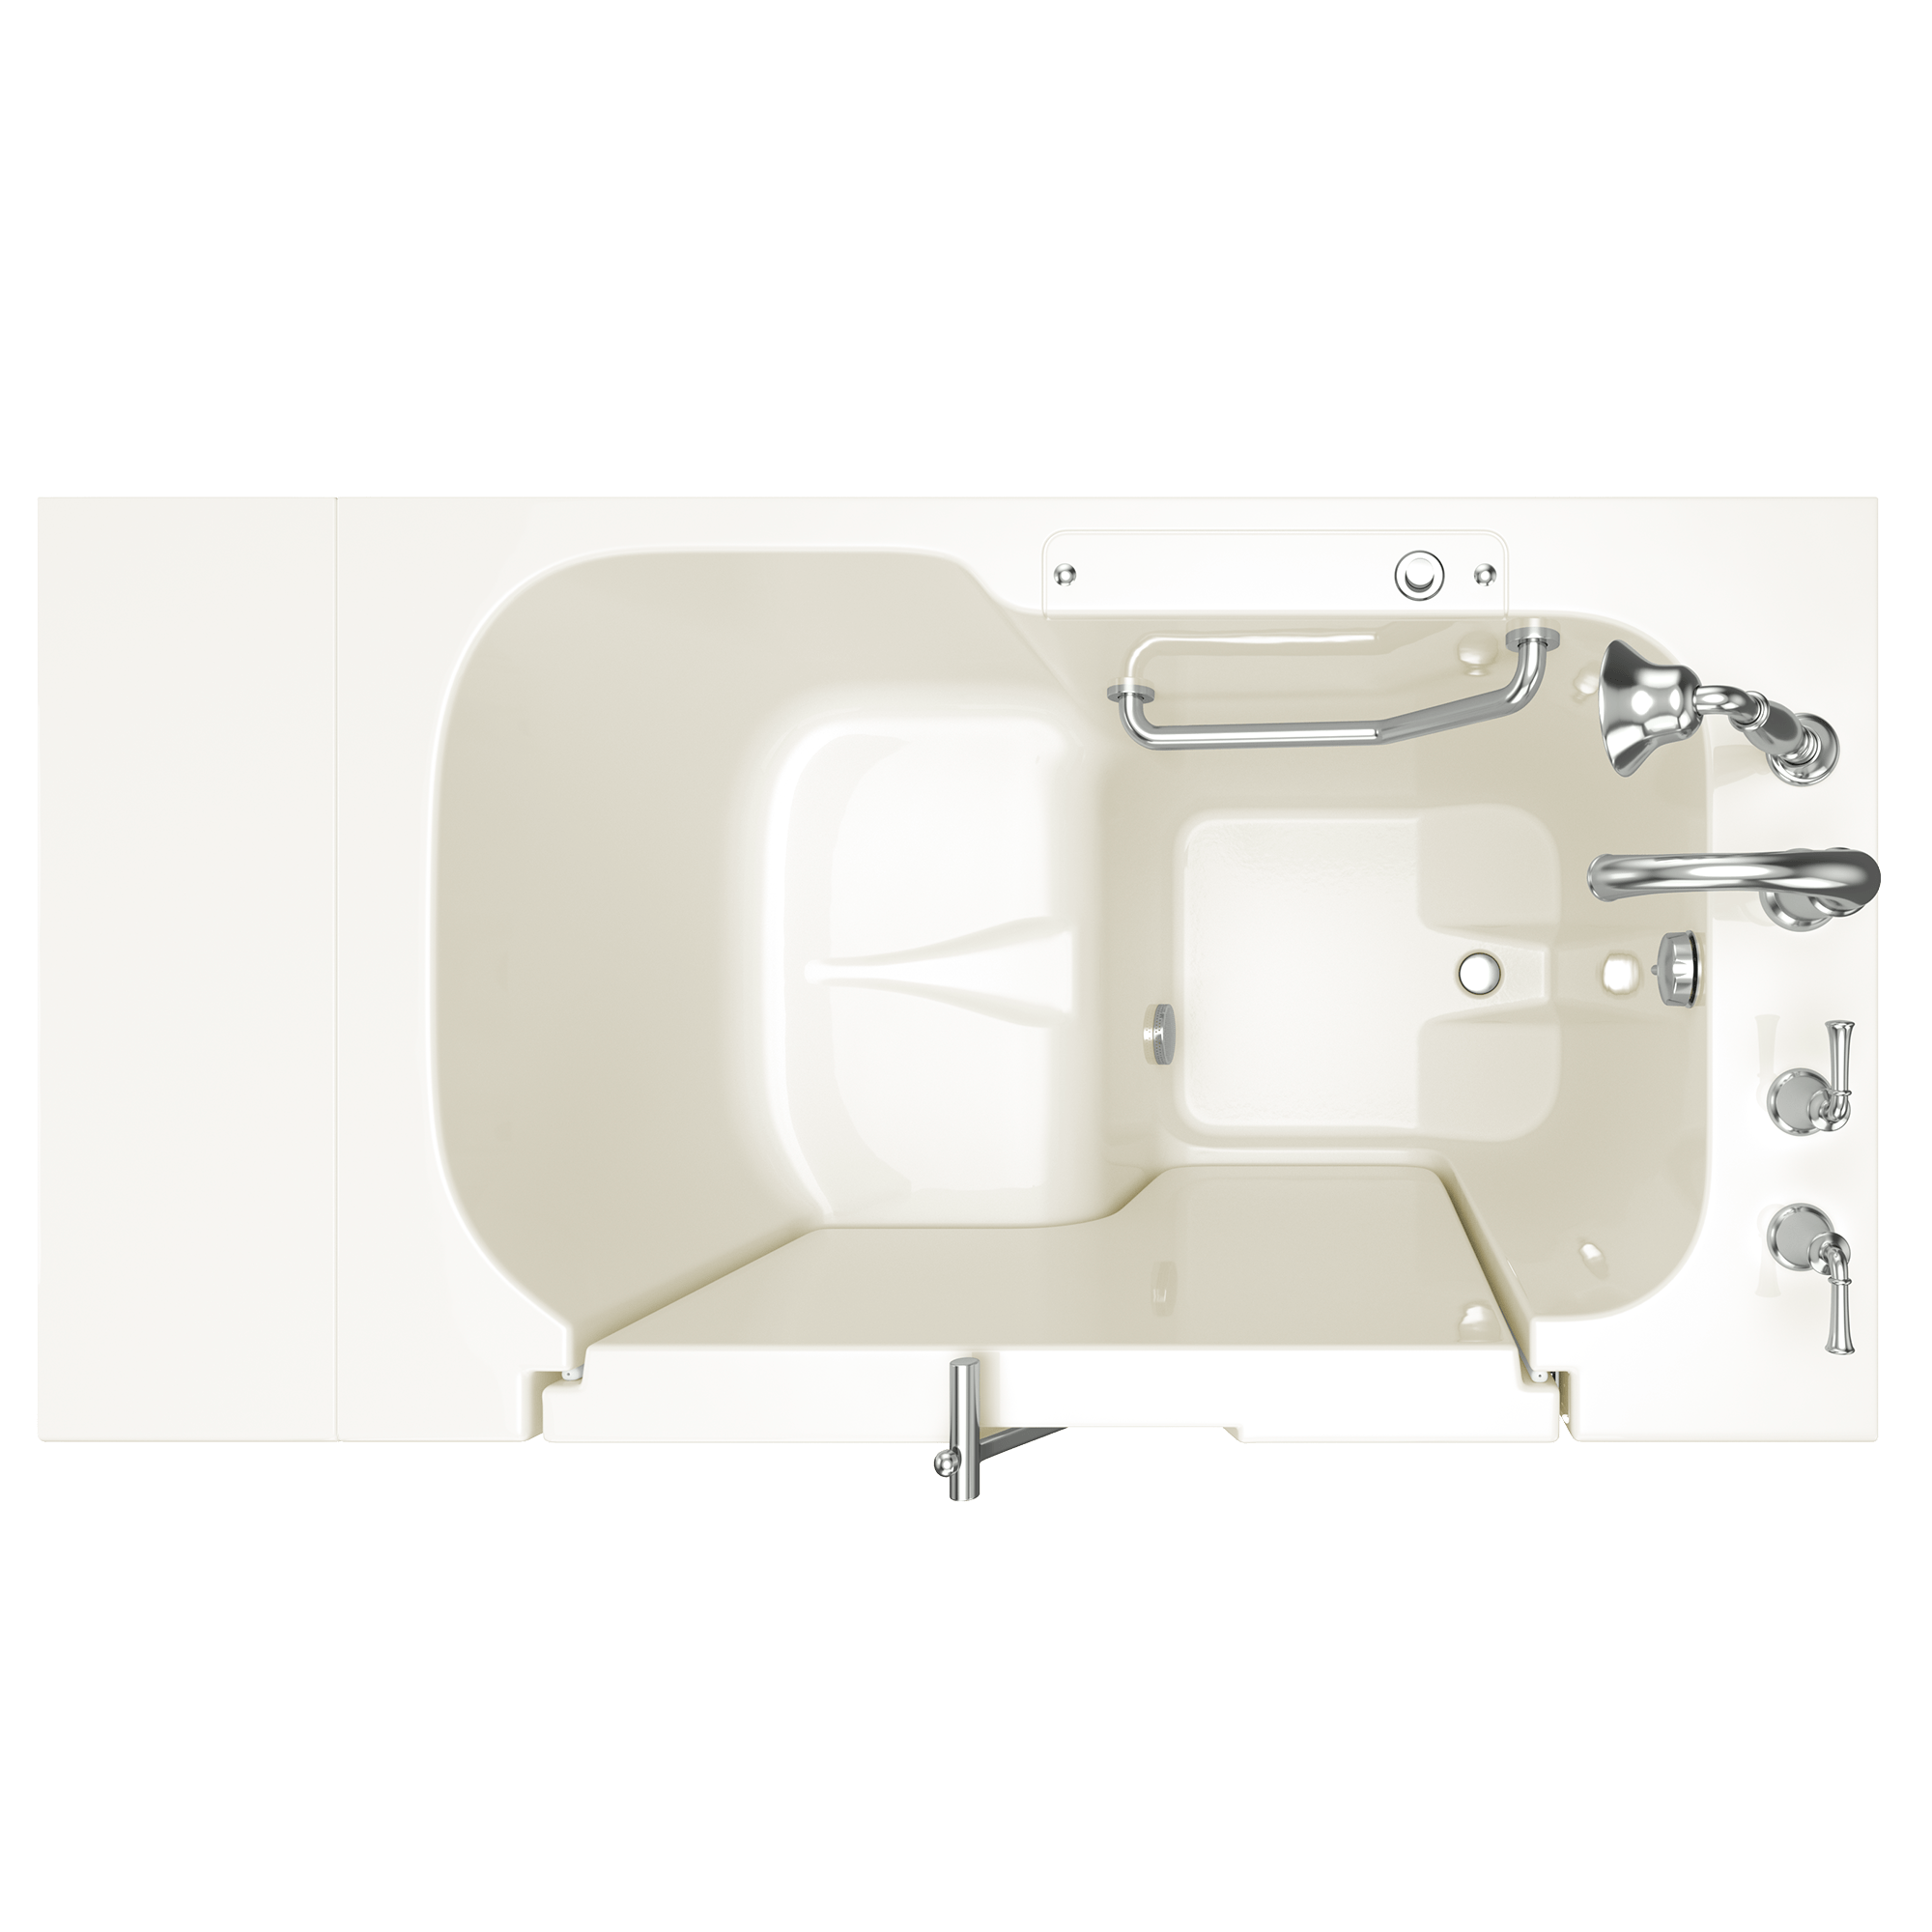 Gelcoat Value Series 32 x 52 -Inch Walk-in Tub With Soaker System - Right-Hand Drain With Faucet